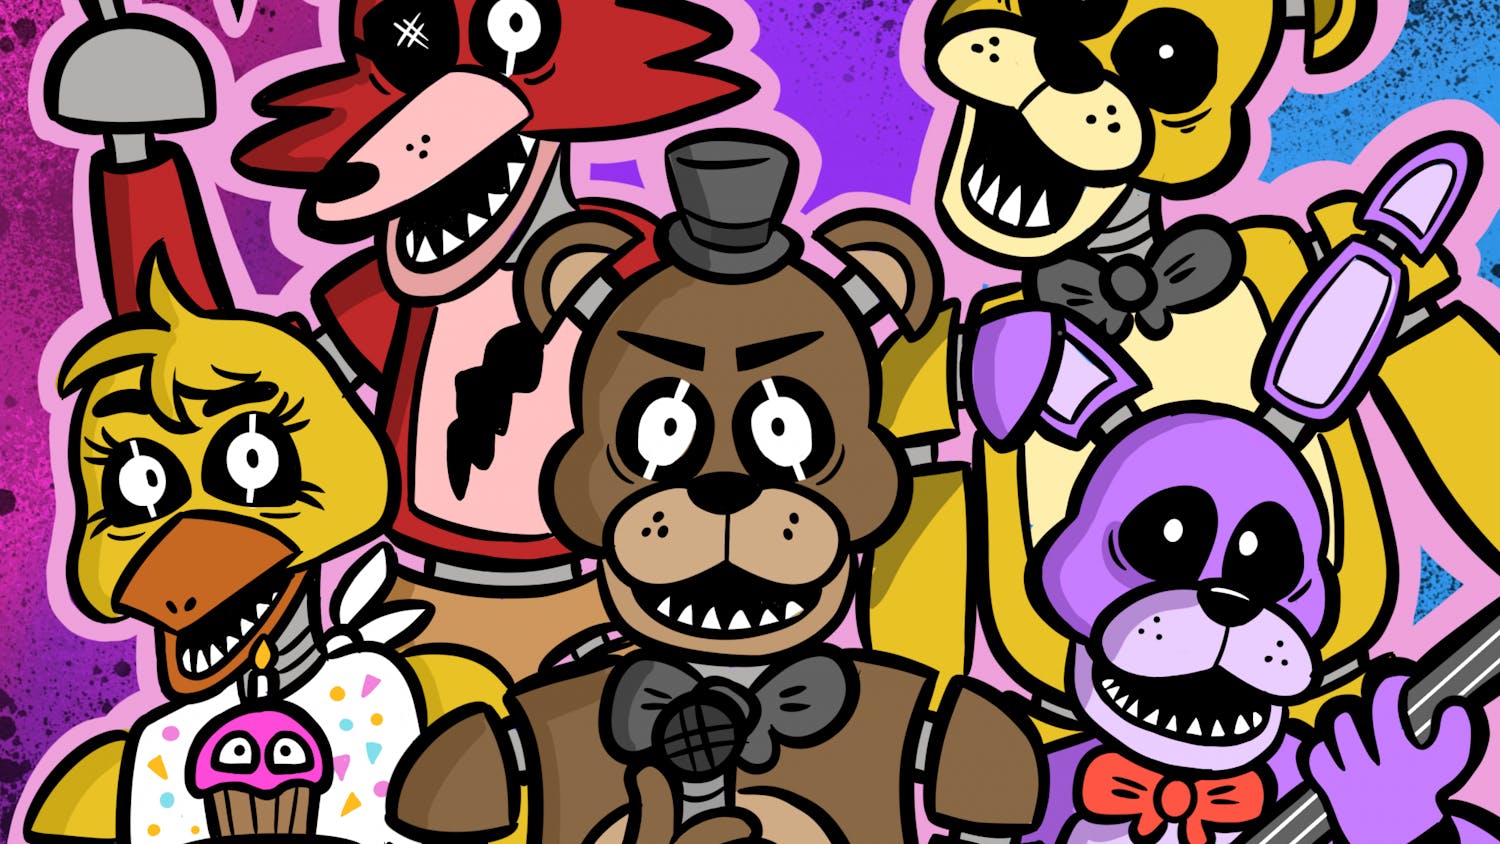 PHILLIPS_Everything we know about the Five Nights at Freddy's movie_LA.png